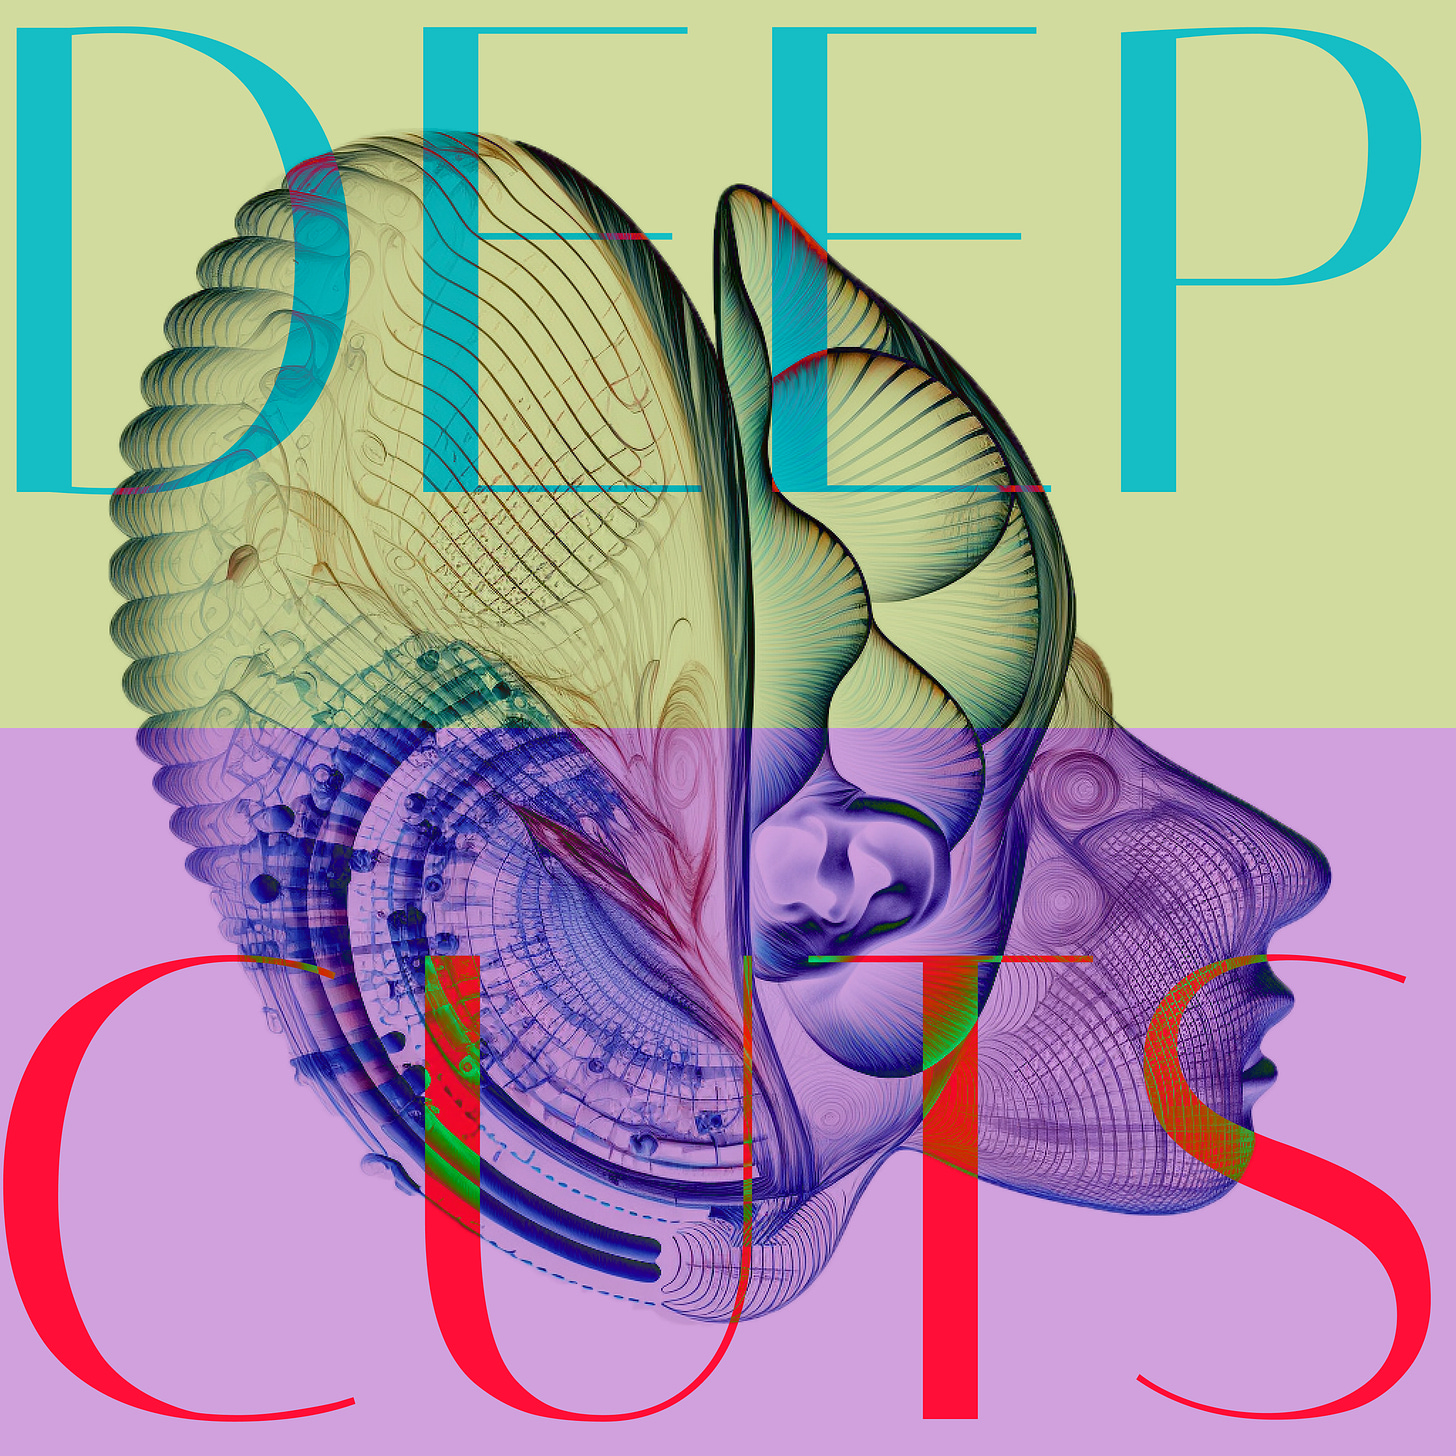 A logo for a podcast with an X-ray style head made out of audio waves. The top half is green and features the word "Deep" in blue. The bottom half is purple and features the word "Cuts" in red